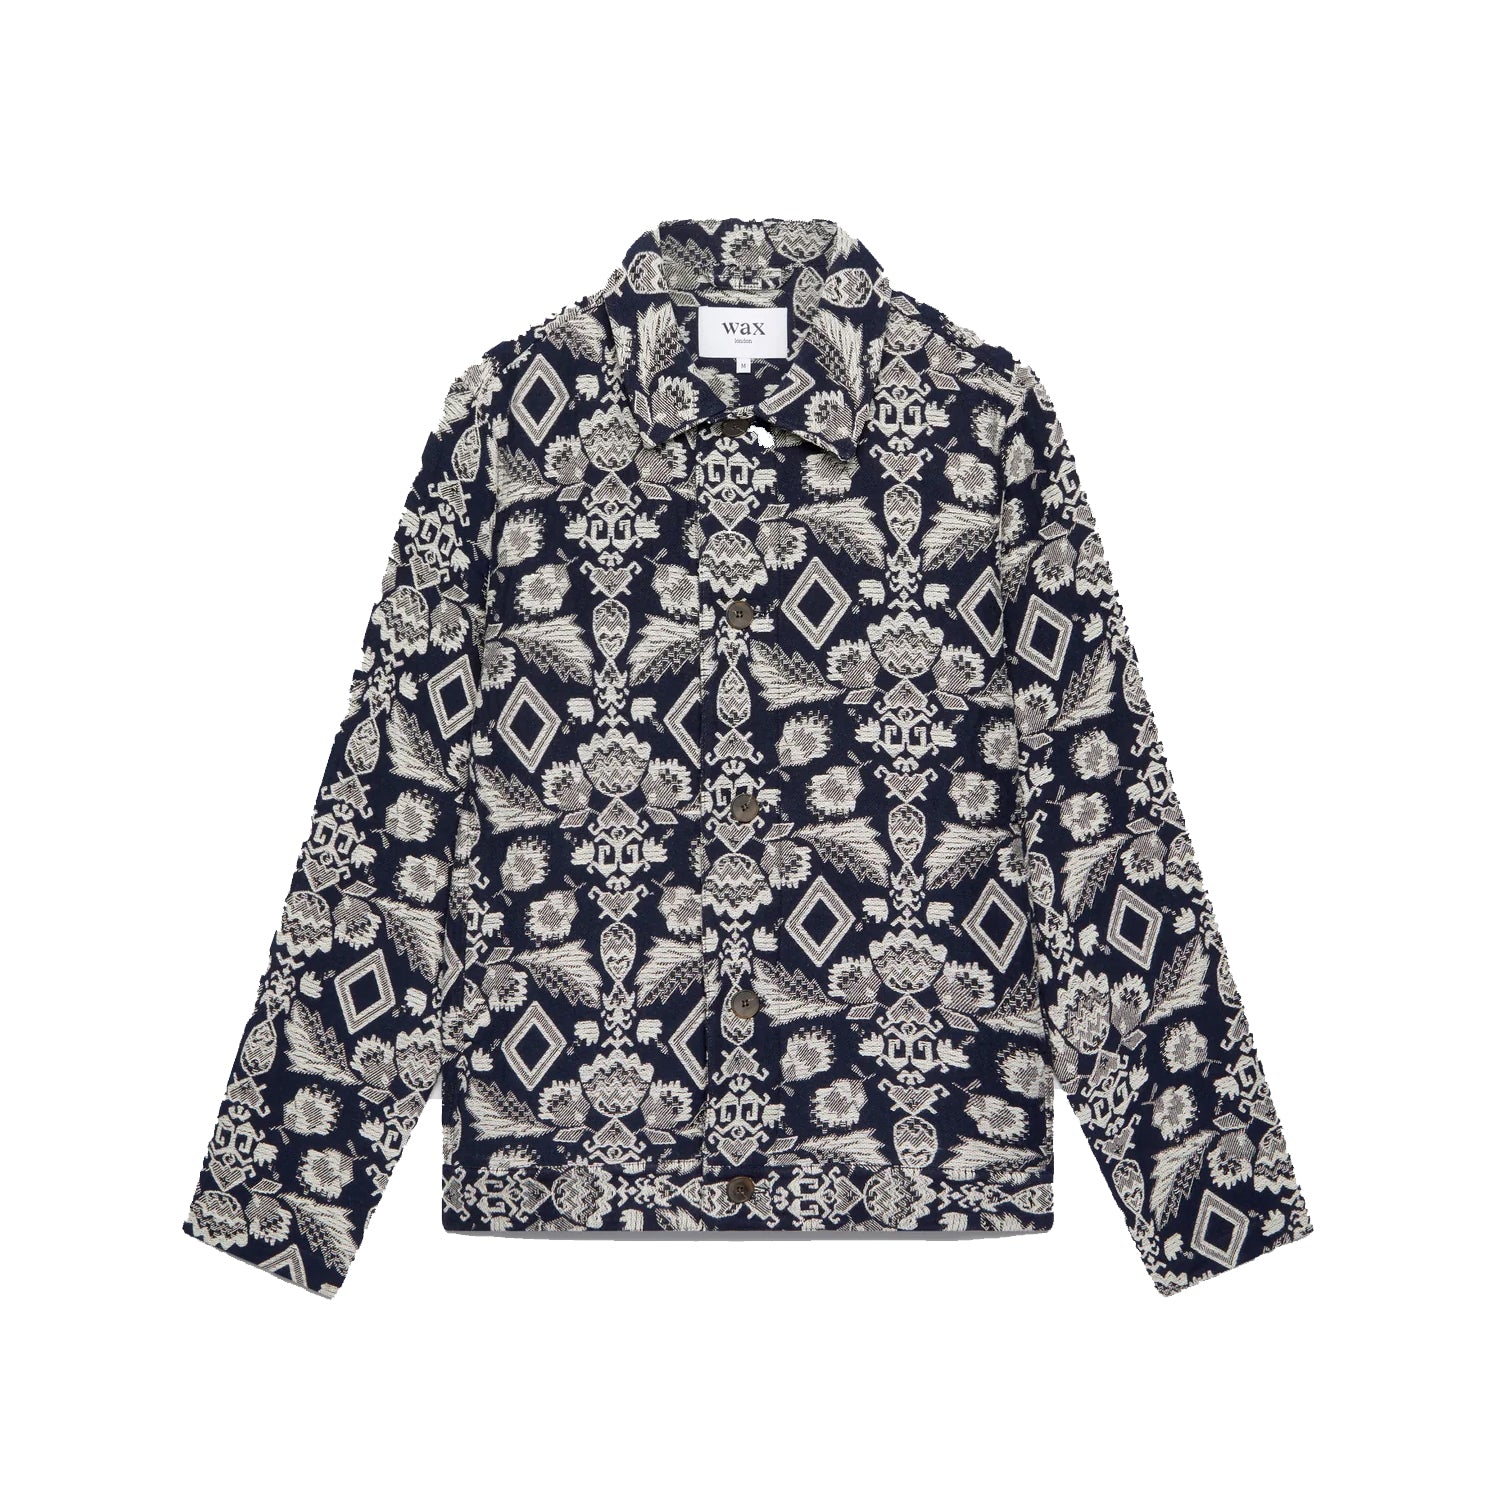 Wax London Iggy Jacket - Geo Floral – Stomping Ground